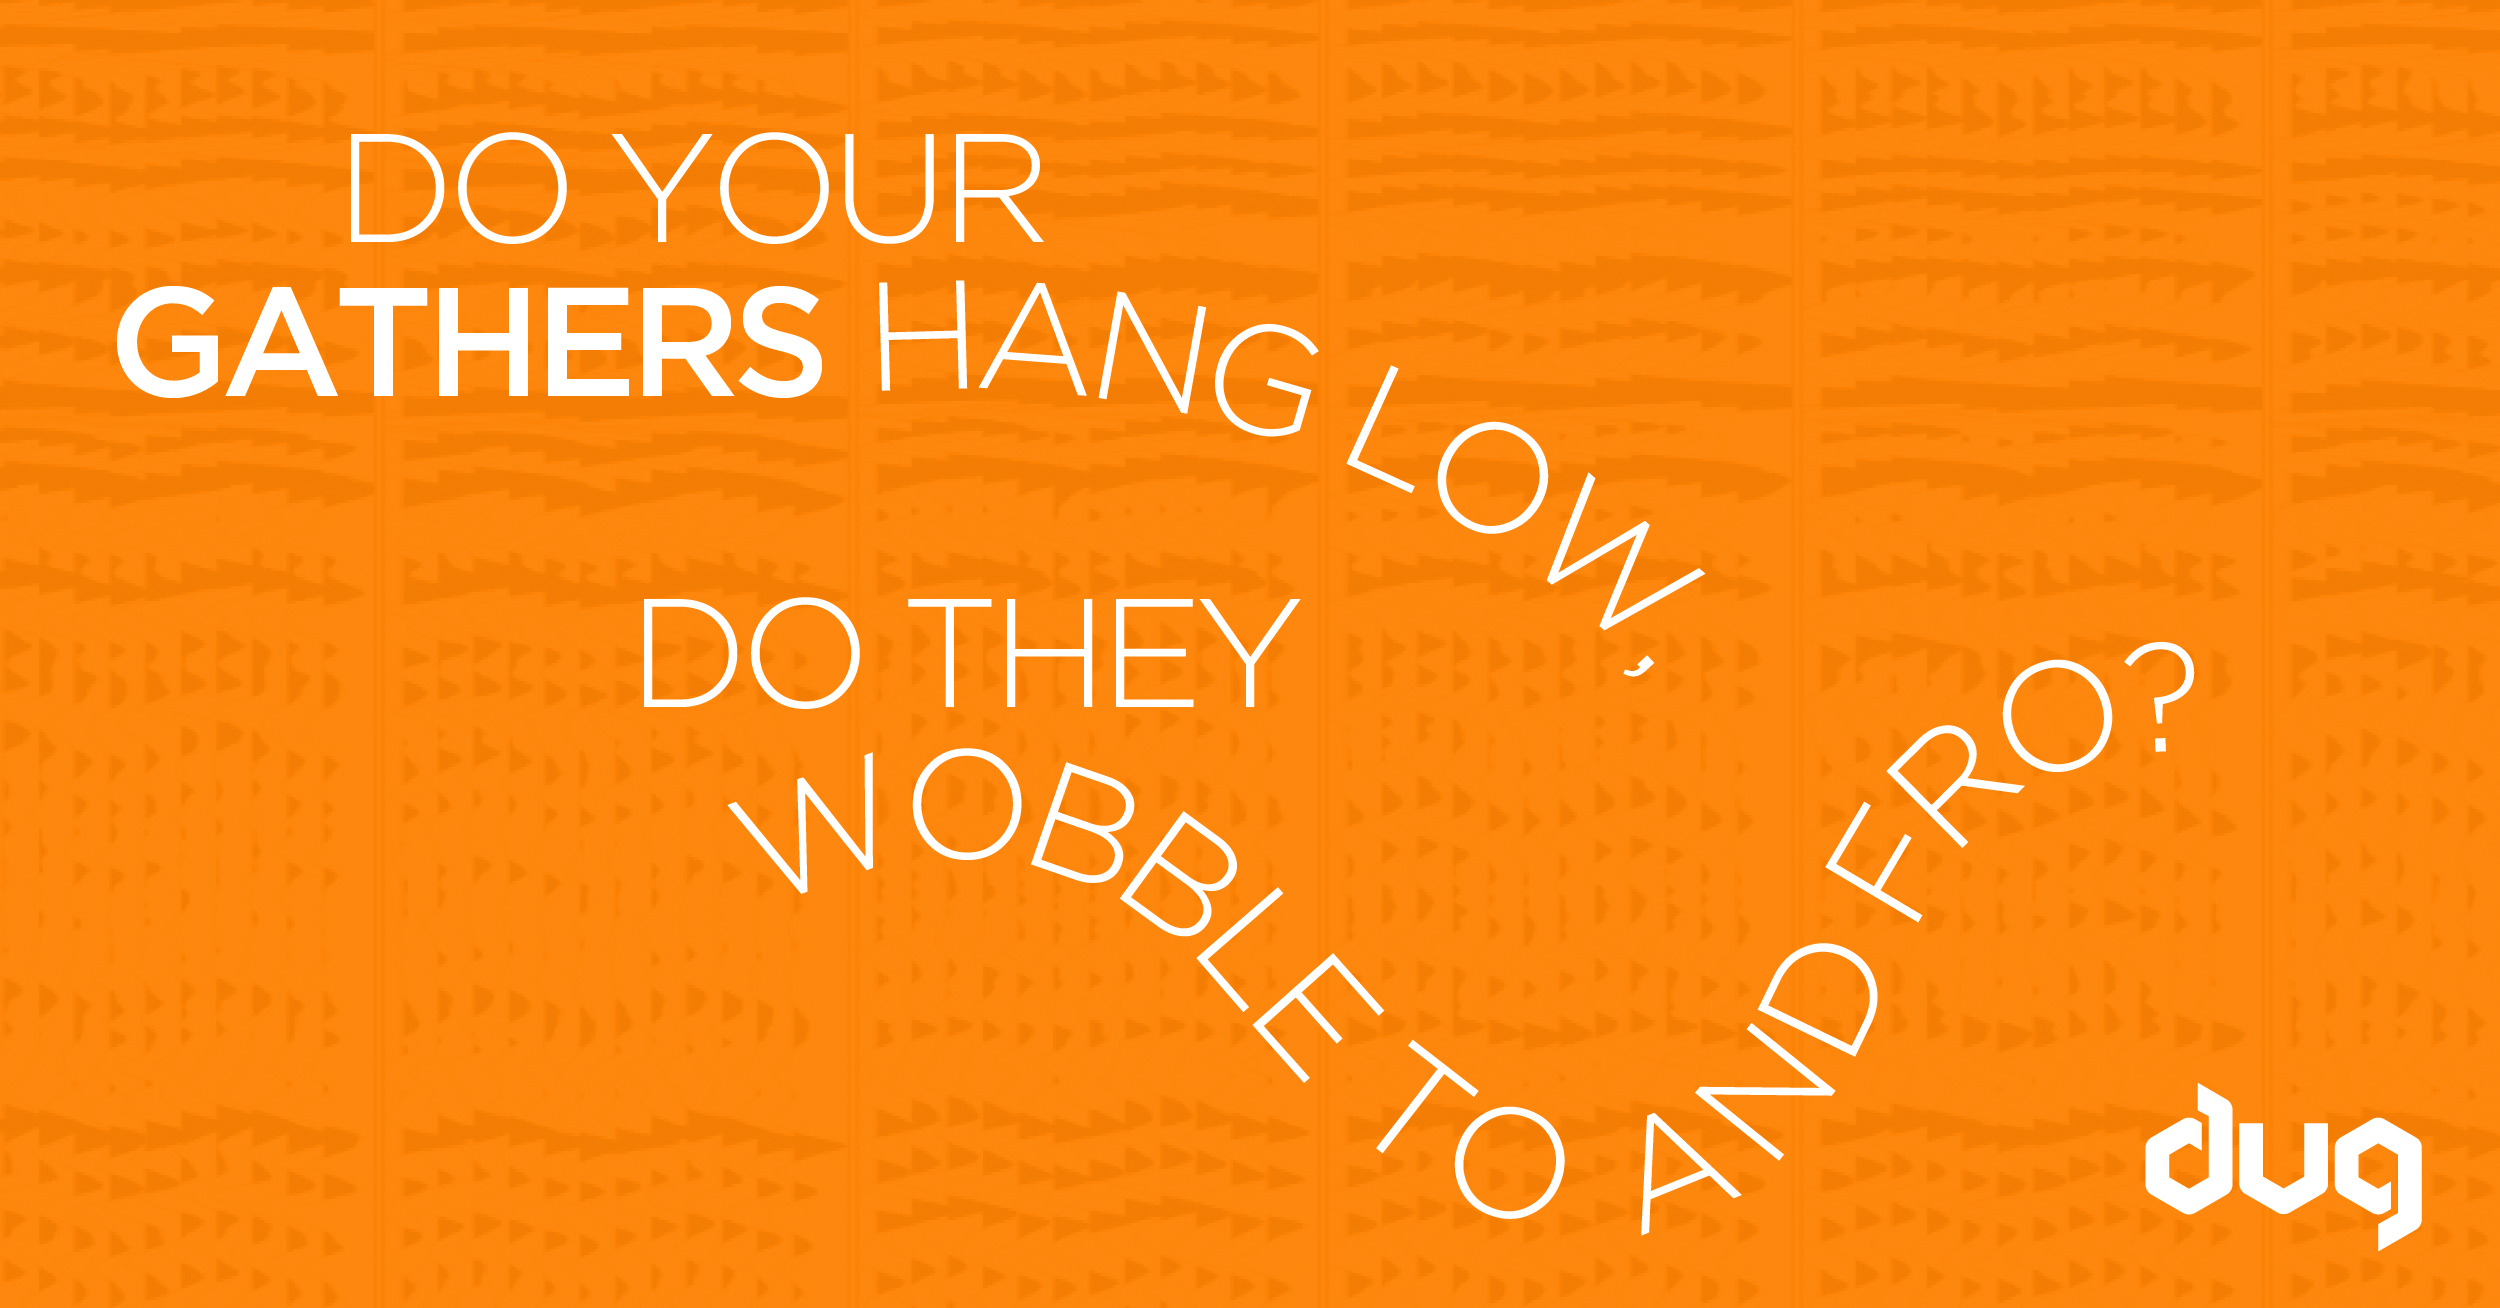 Do your gathers hang low, do they wobble to and fro?